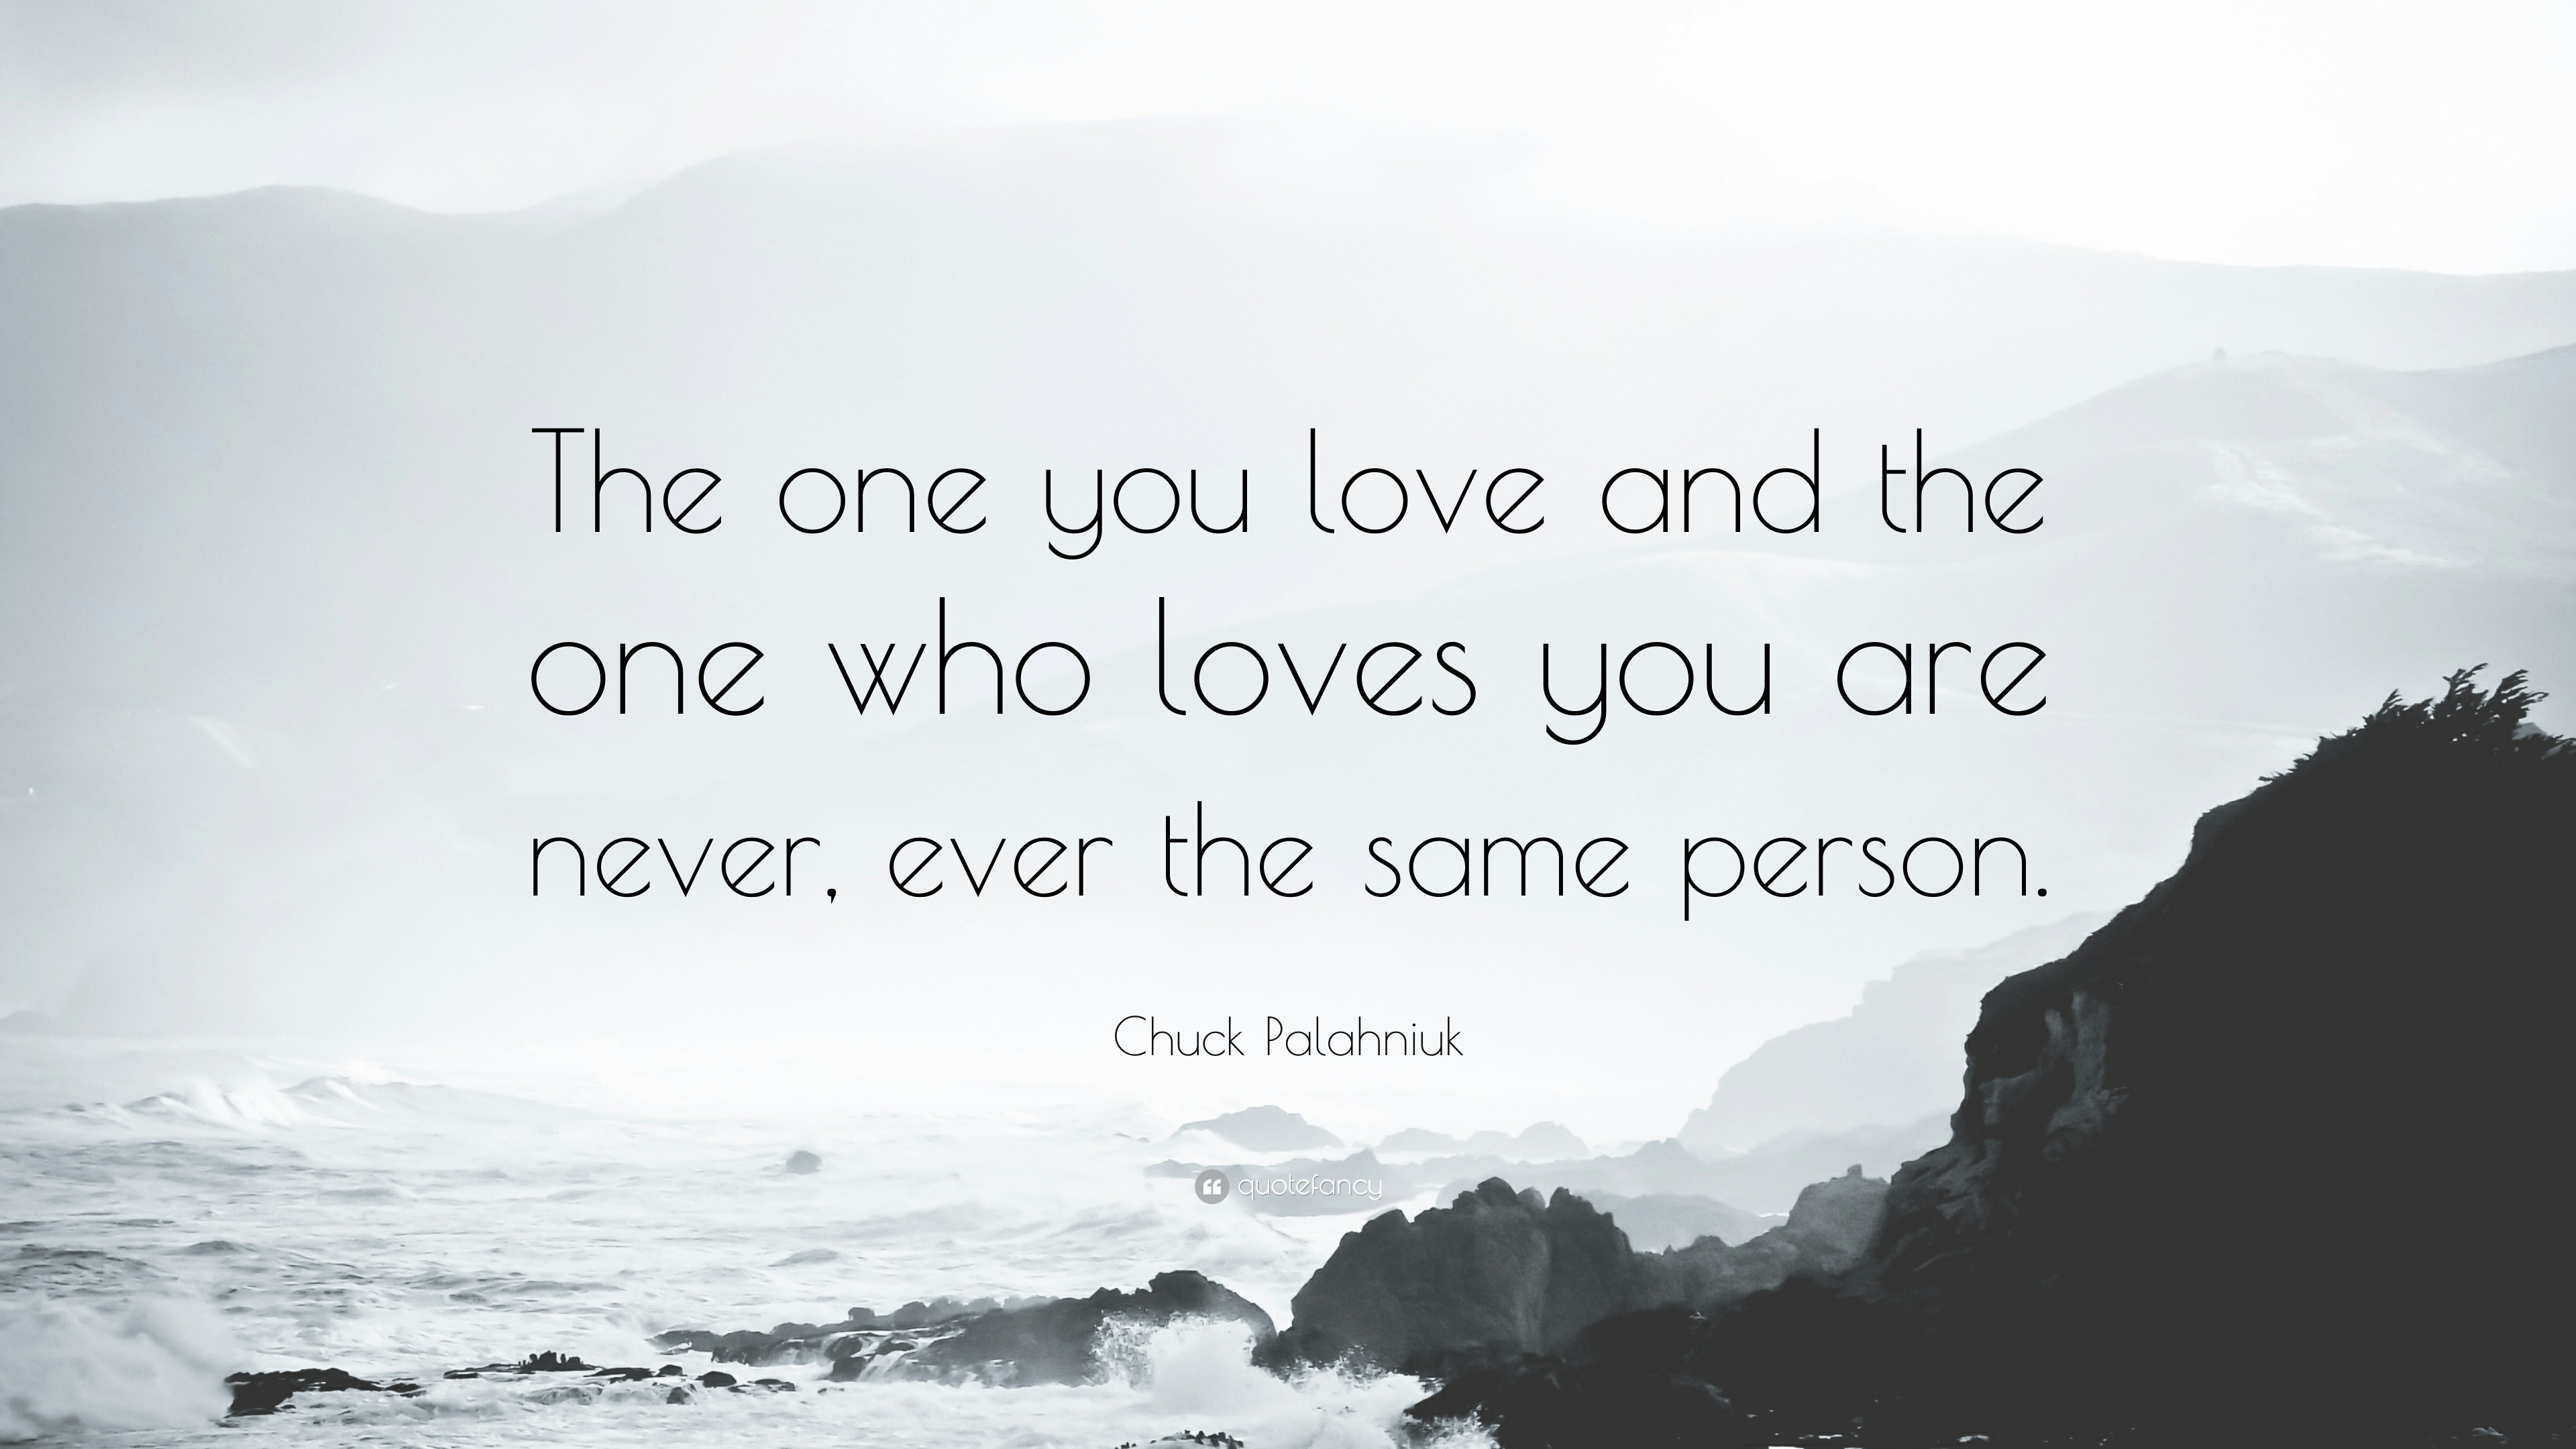 When the person you love